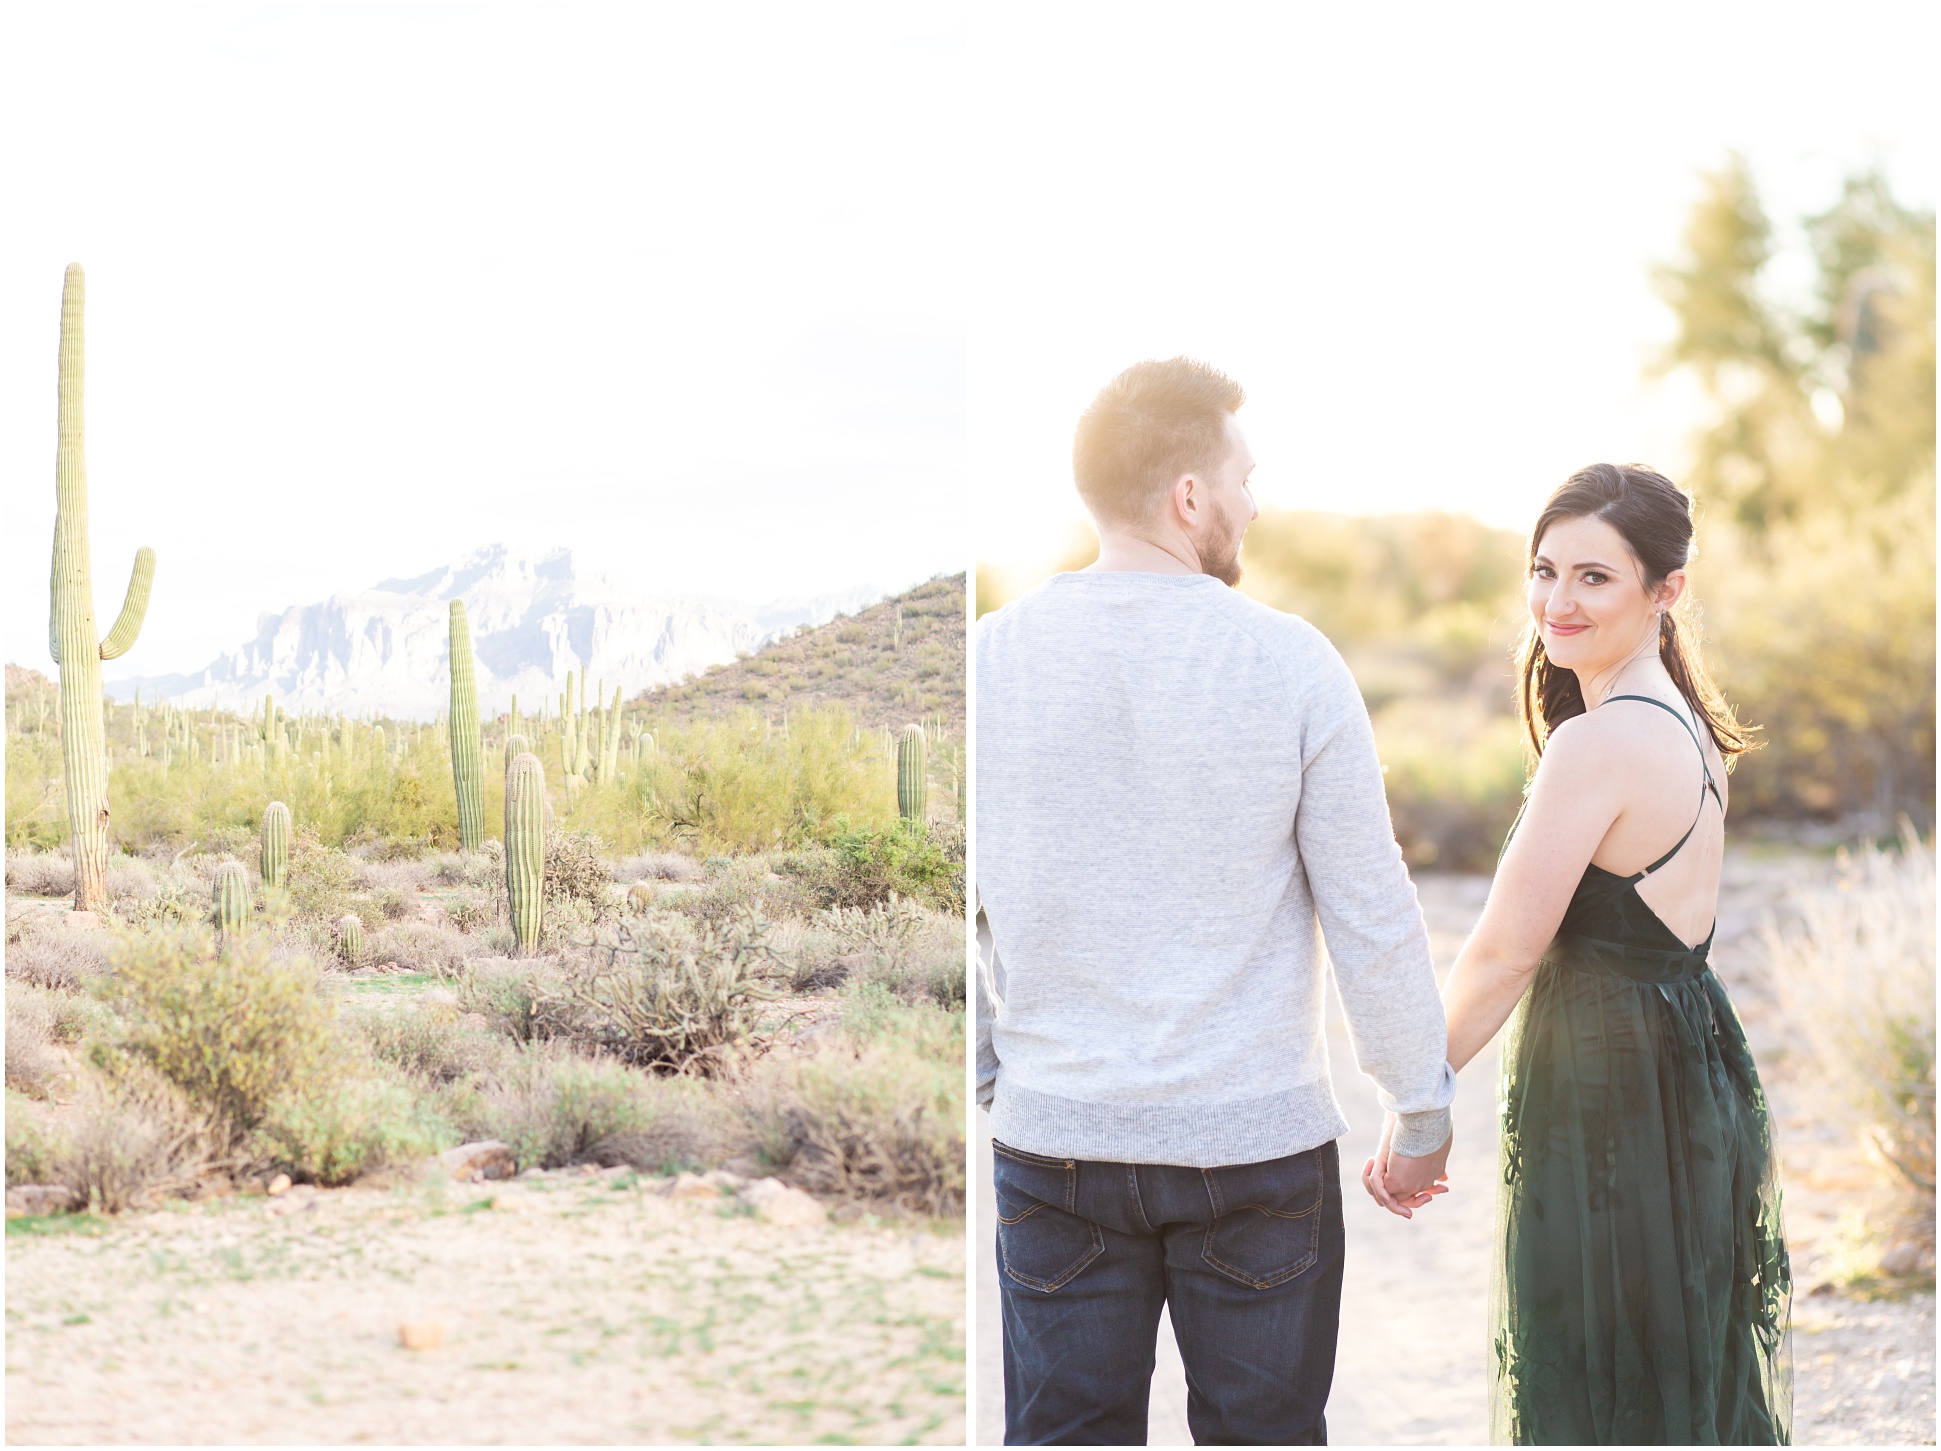 Left Image: Usery Mountain facing East, Right Image: Kaila holding Jakes hand looking over her shoulder